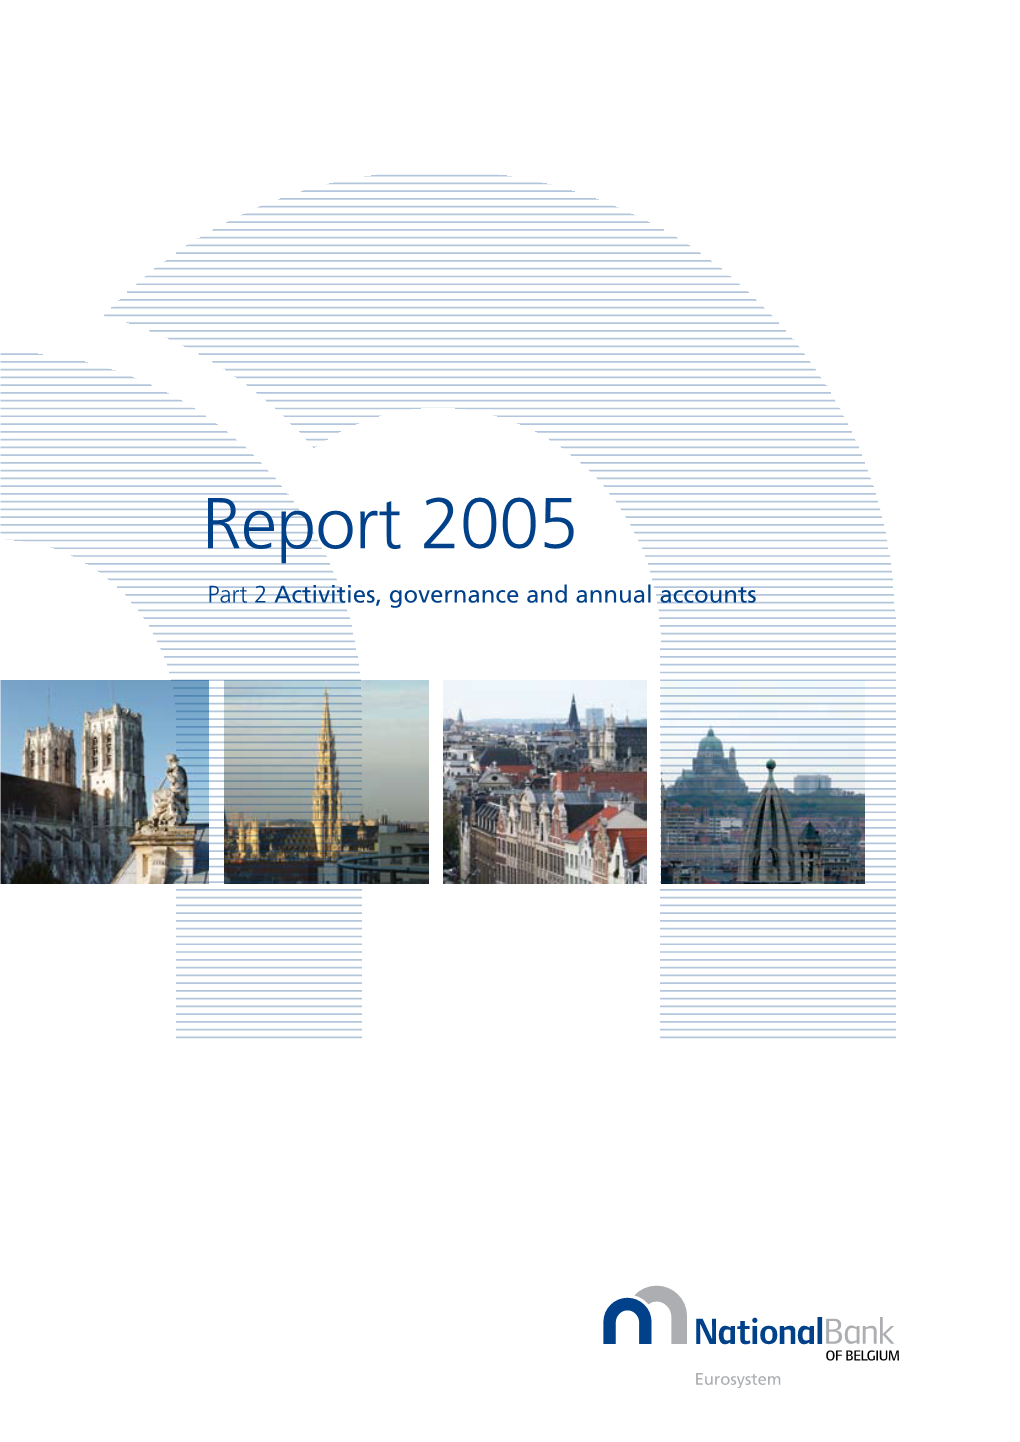 Report 2005 Part 2 Activities, Governance and Annual Accounts FOREWORD